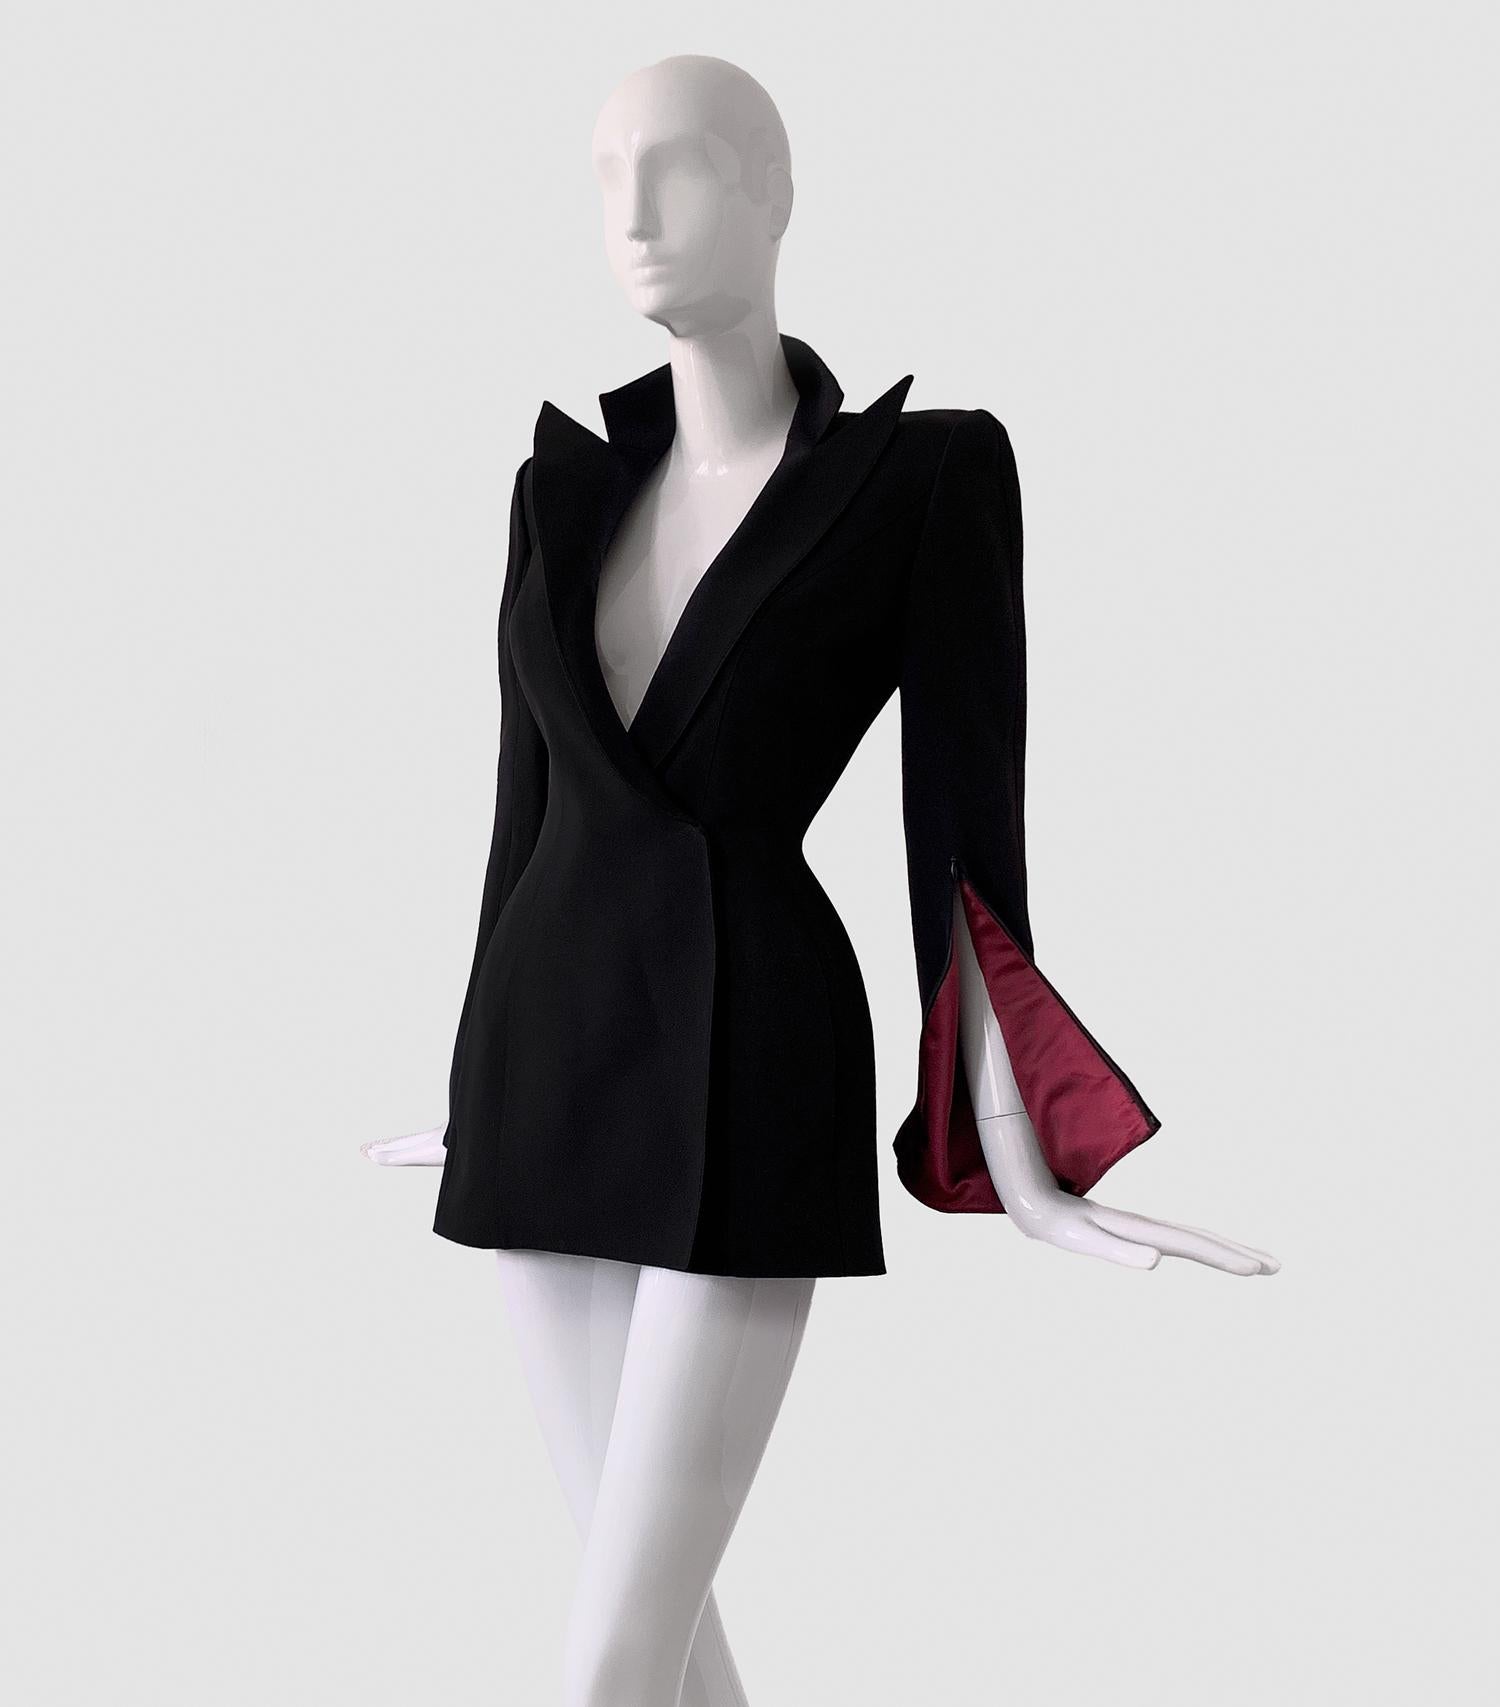 
Stunning etremely rare Thierry Mugler Couture piece

Museum worthy Collectors Piece.
Thierry Mugler Couture Blazer/Jacket Spring Summer Collection 2001.
Dramatic silk blazer with amazing surreal open sleeves. Black outside and dark red inside.  The